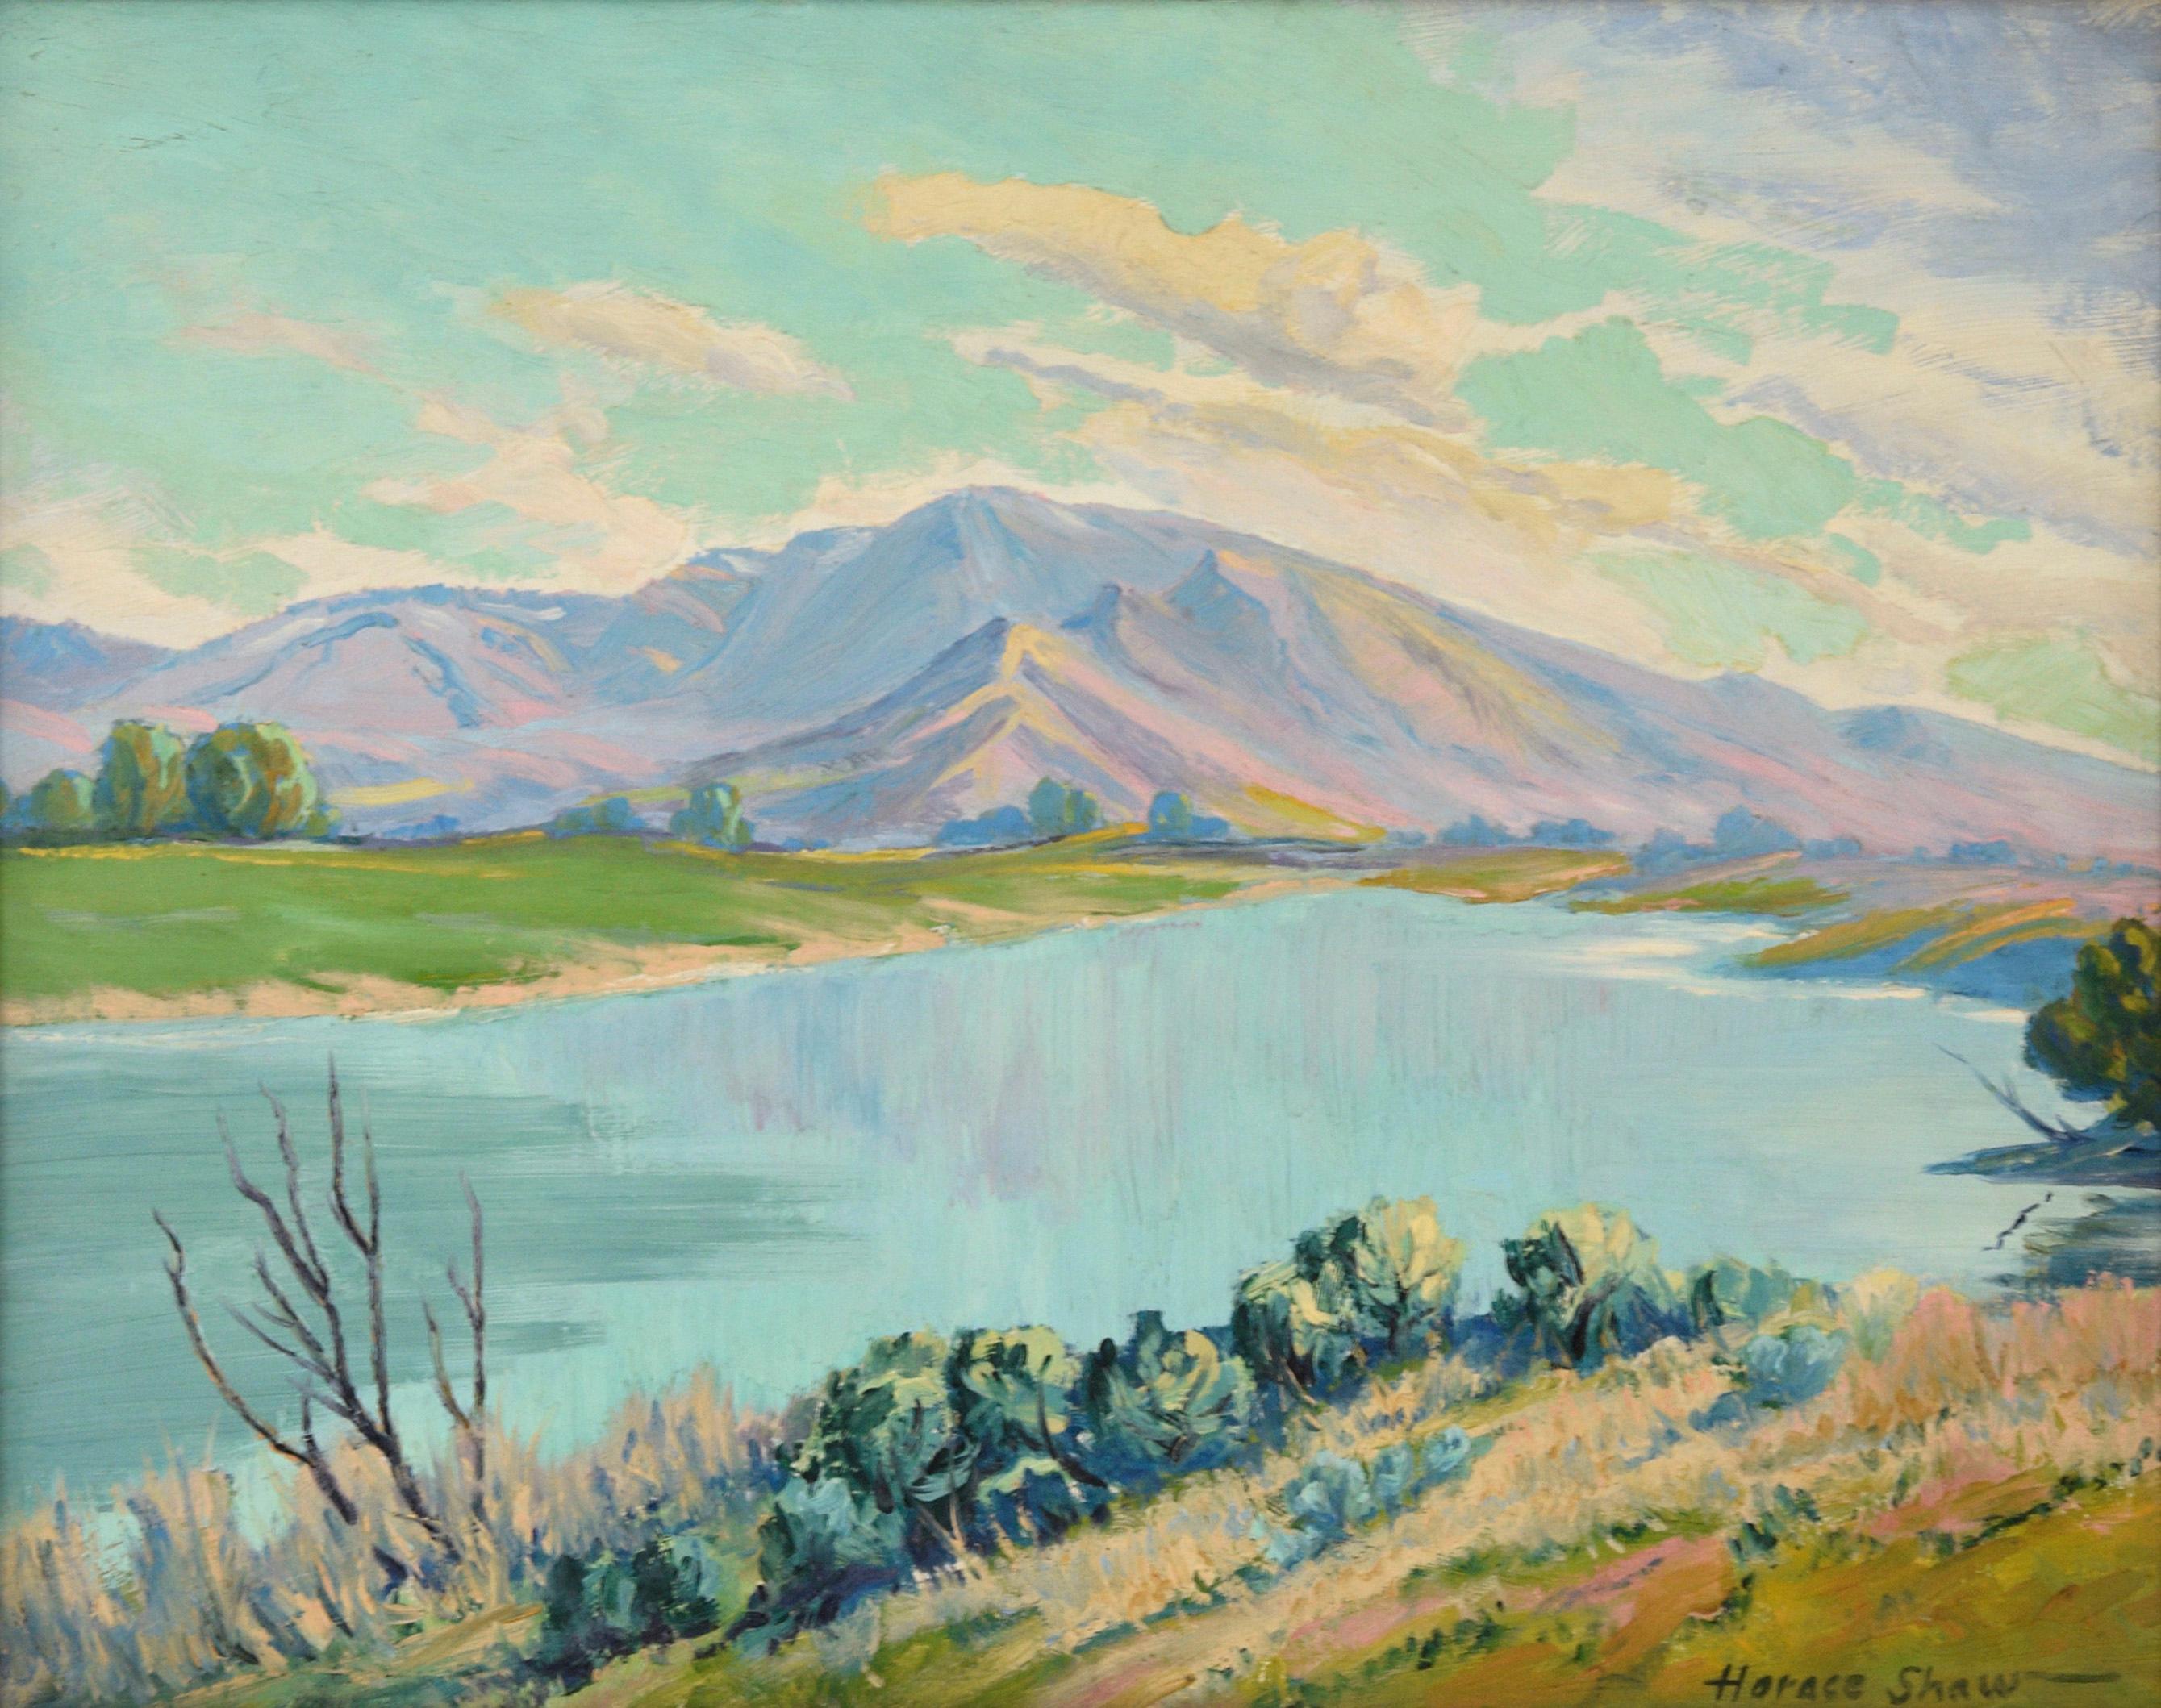 Glassy Lake and Purple Mountain Landscape - Painting by Horace Shaw